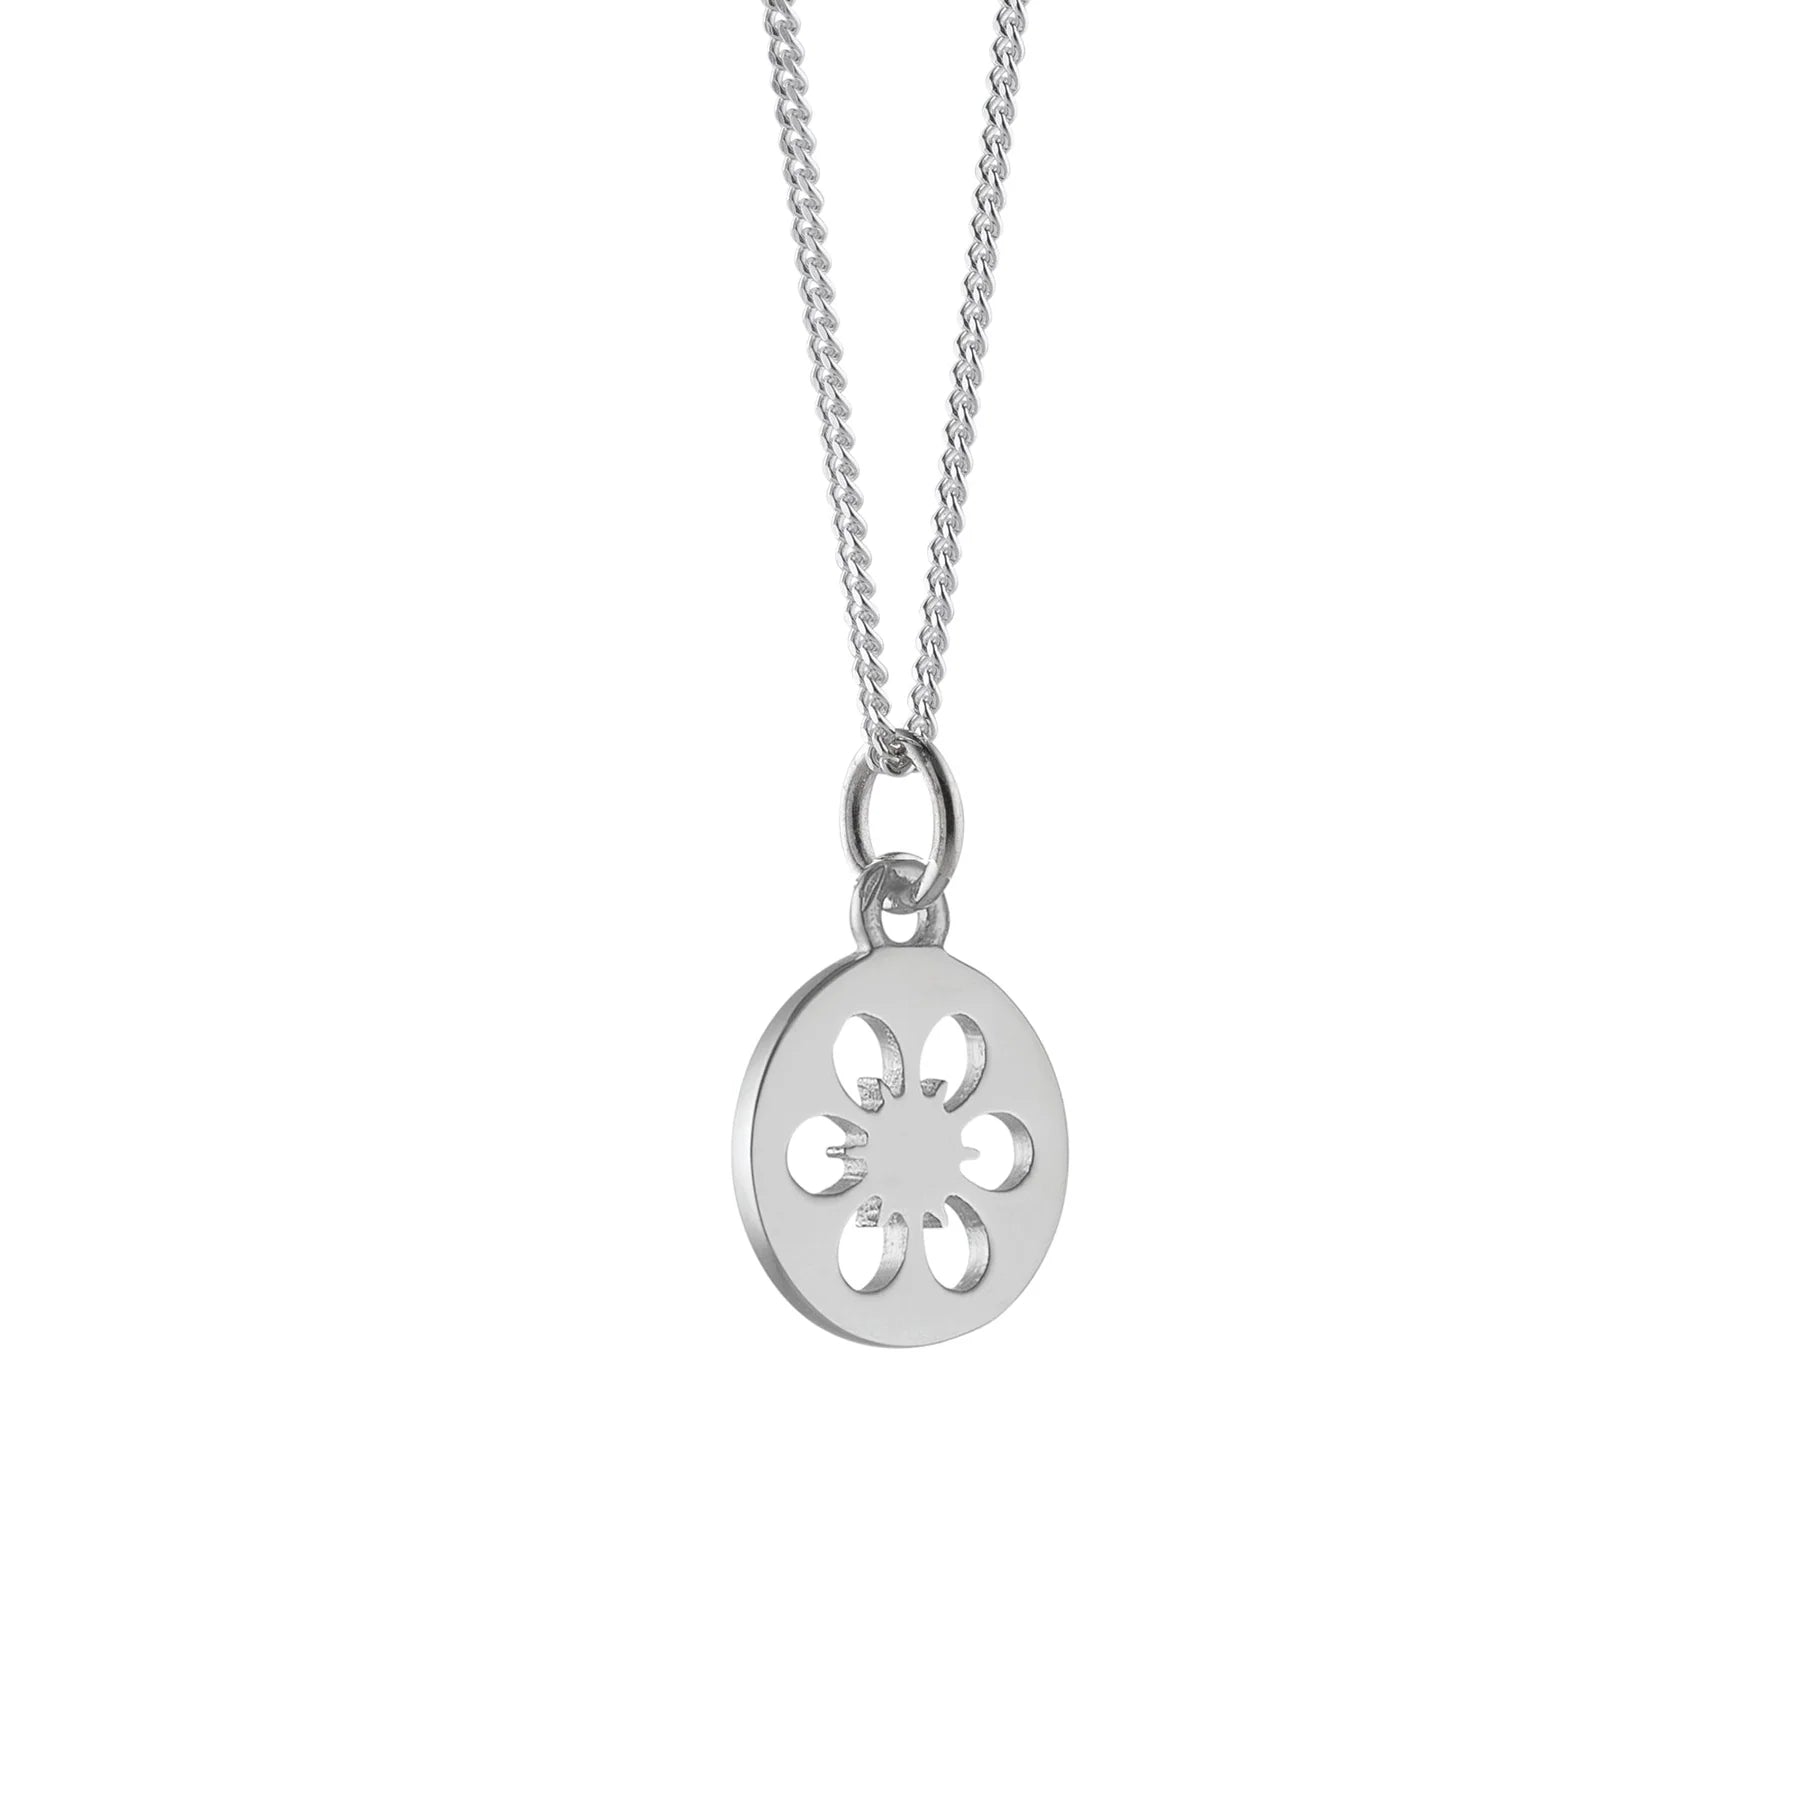 Silhouette Silver Necklace with Cut Out Flower